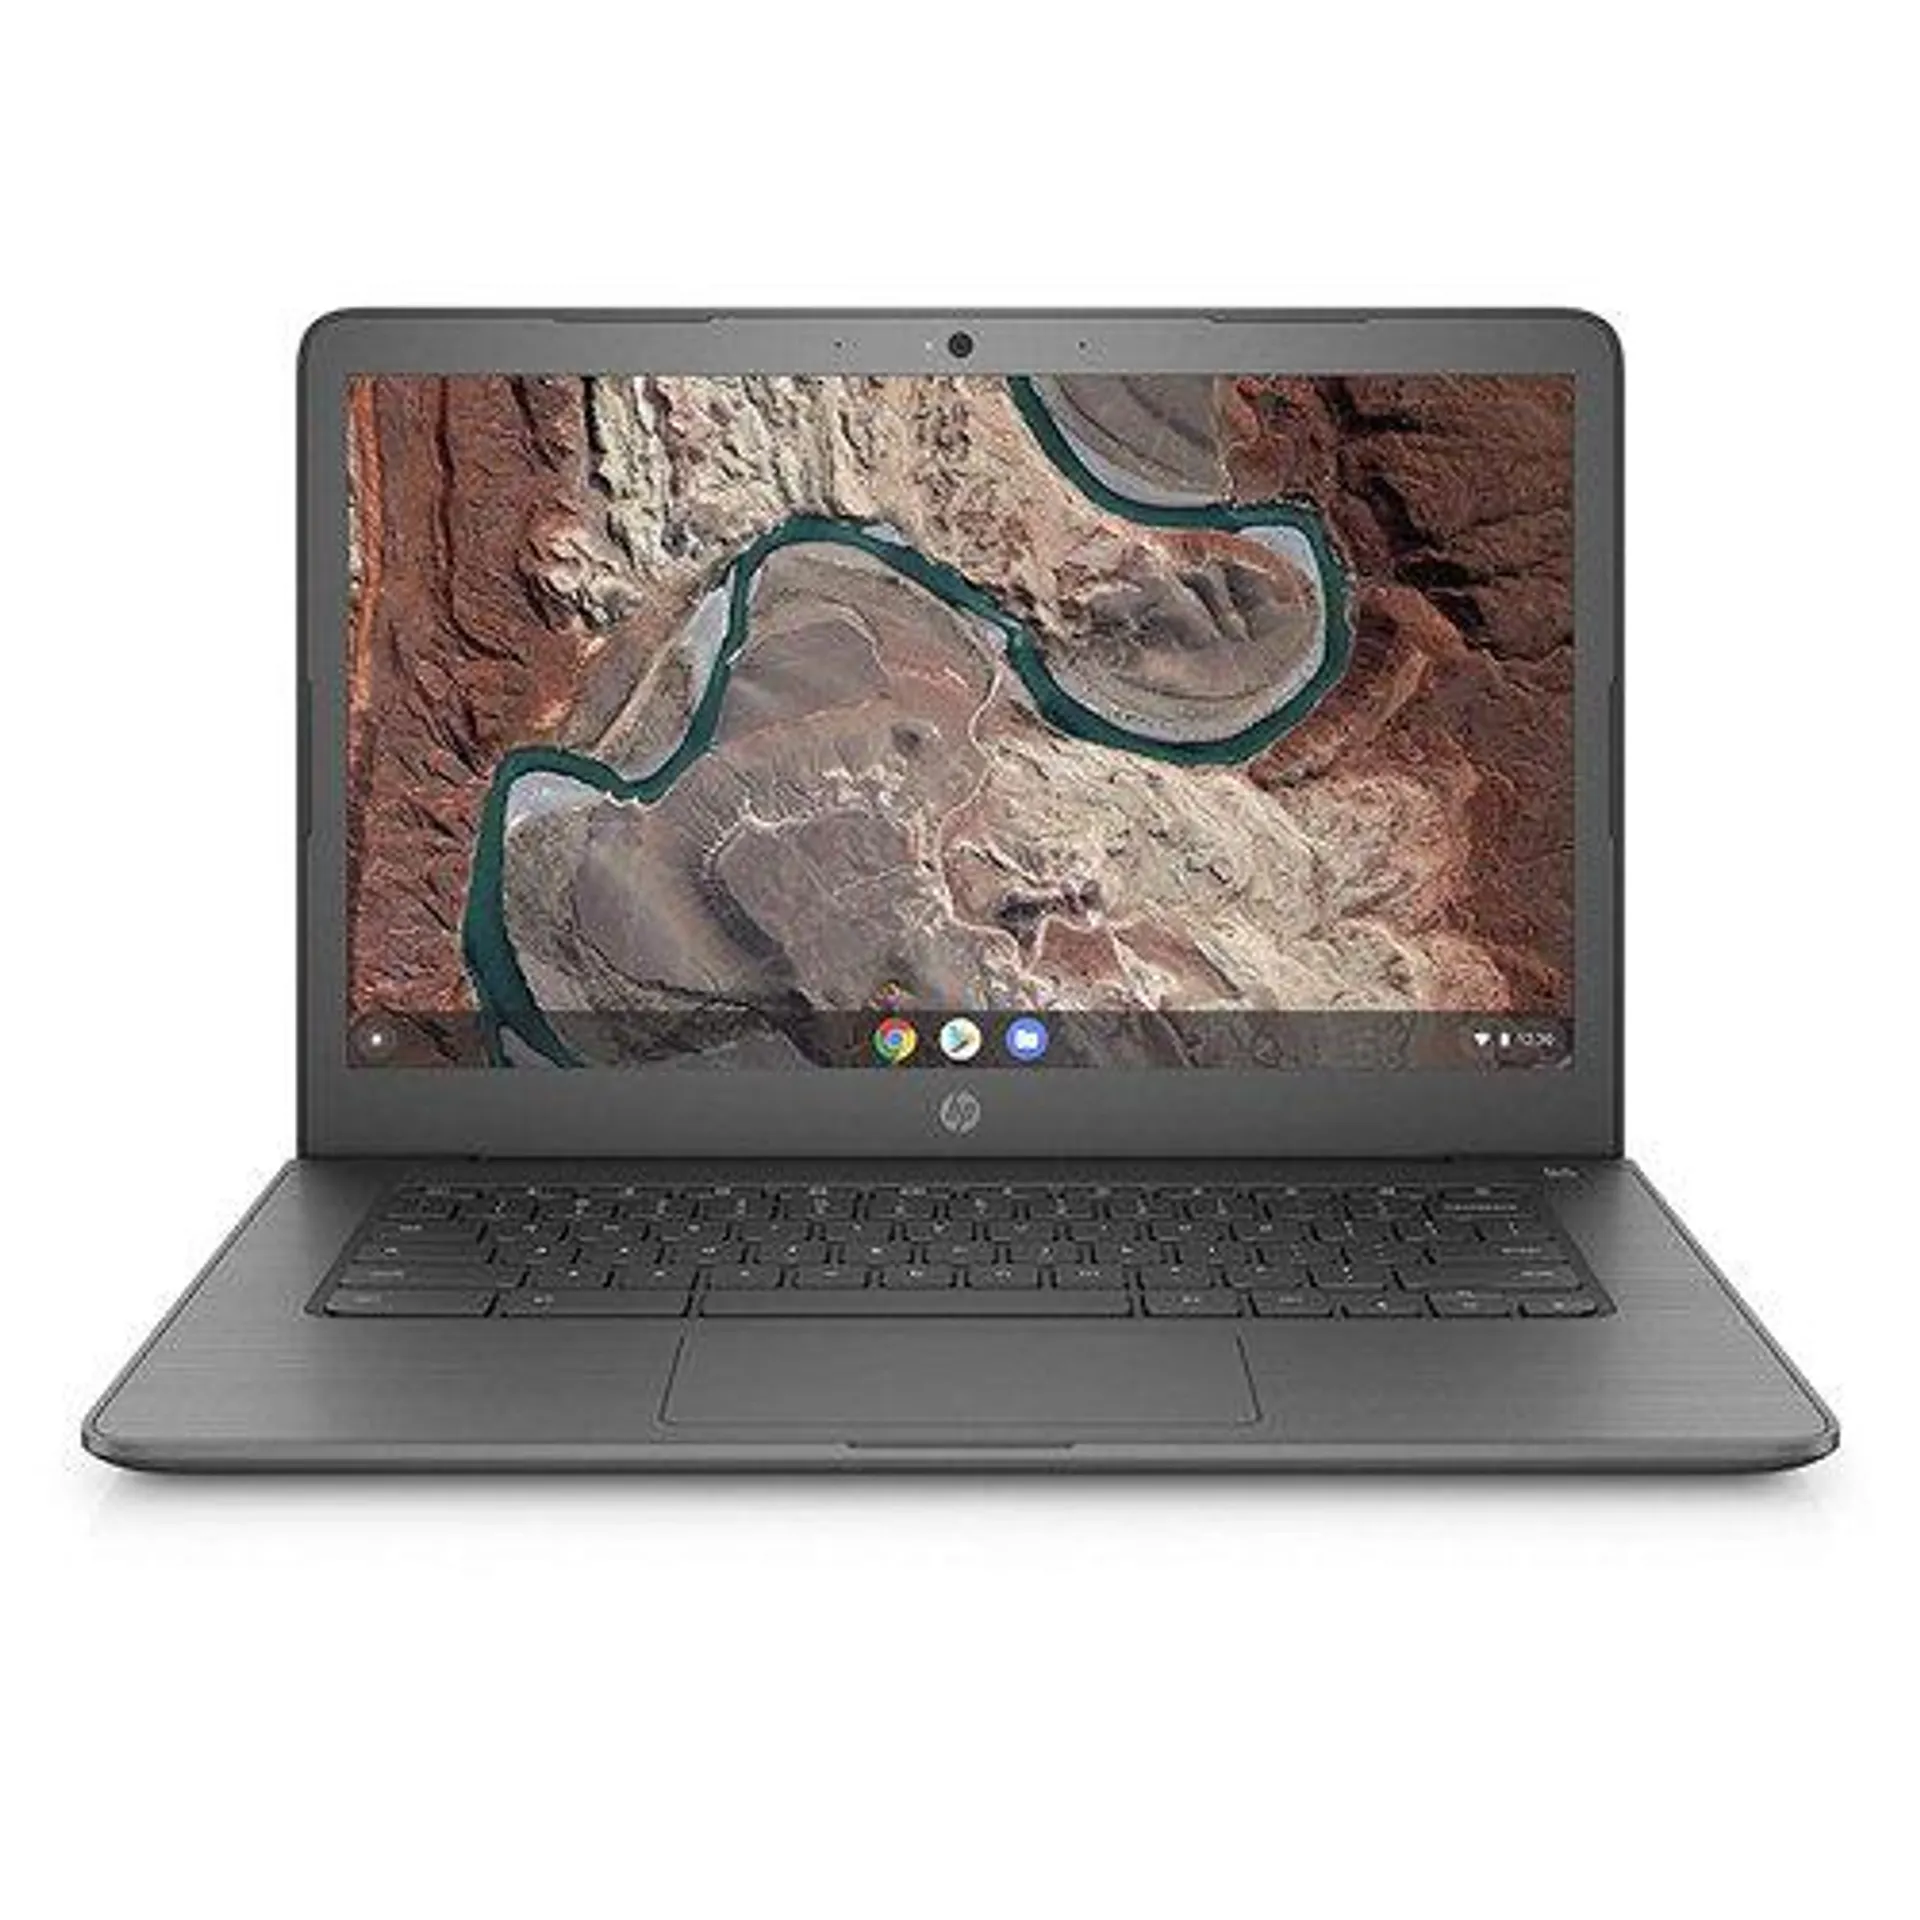 Hewlett Packard Chromebook 14-inch HD Non-Touch Laptop with 180-degree Hinge - Grey